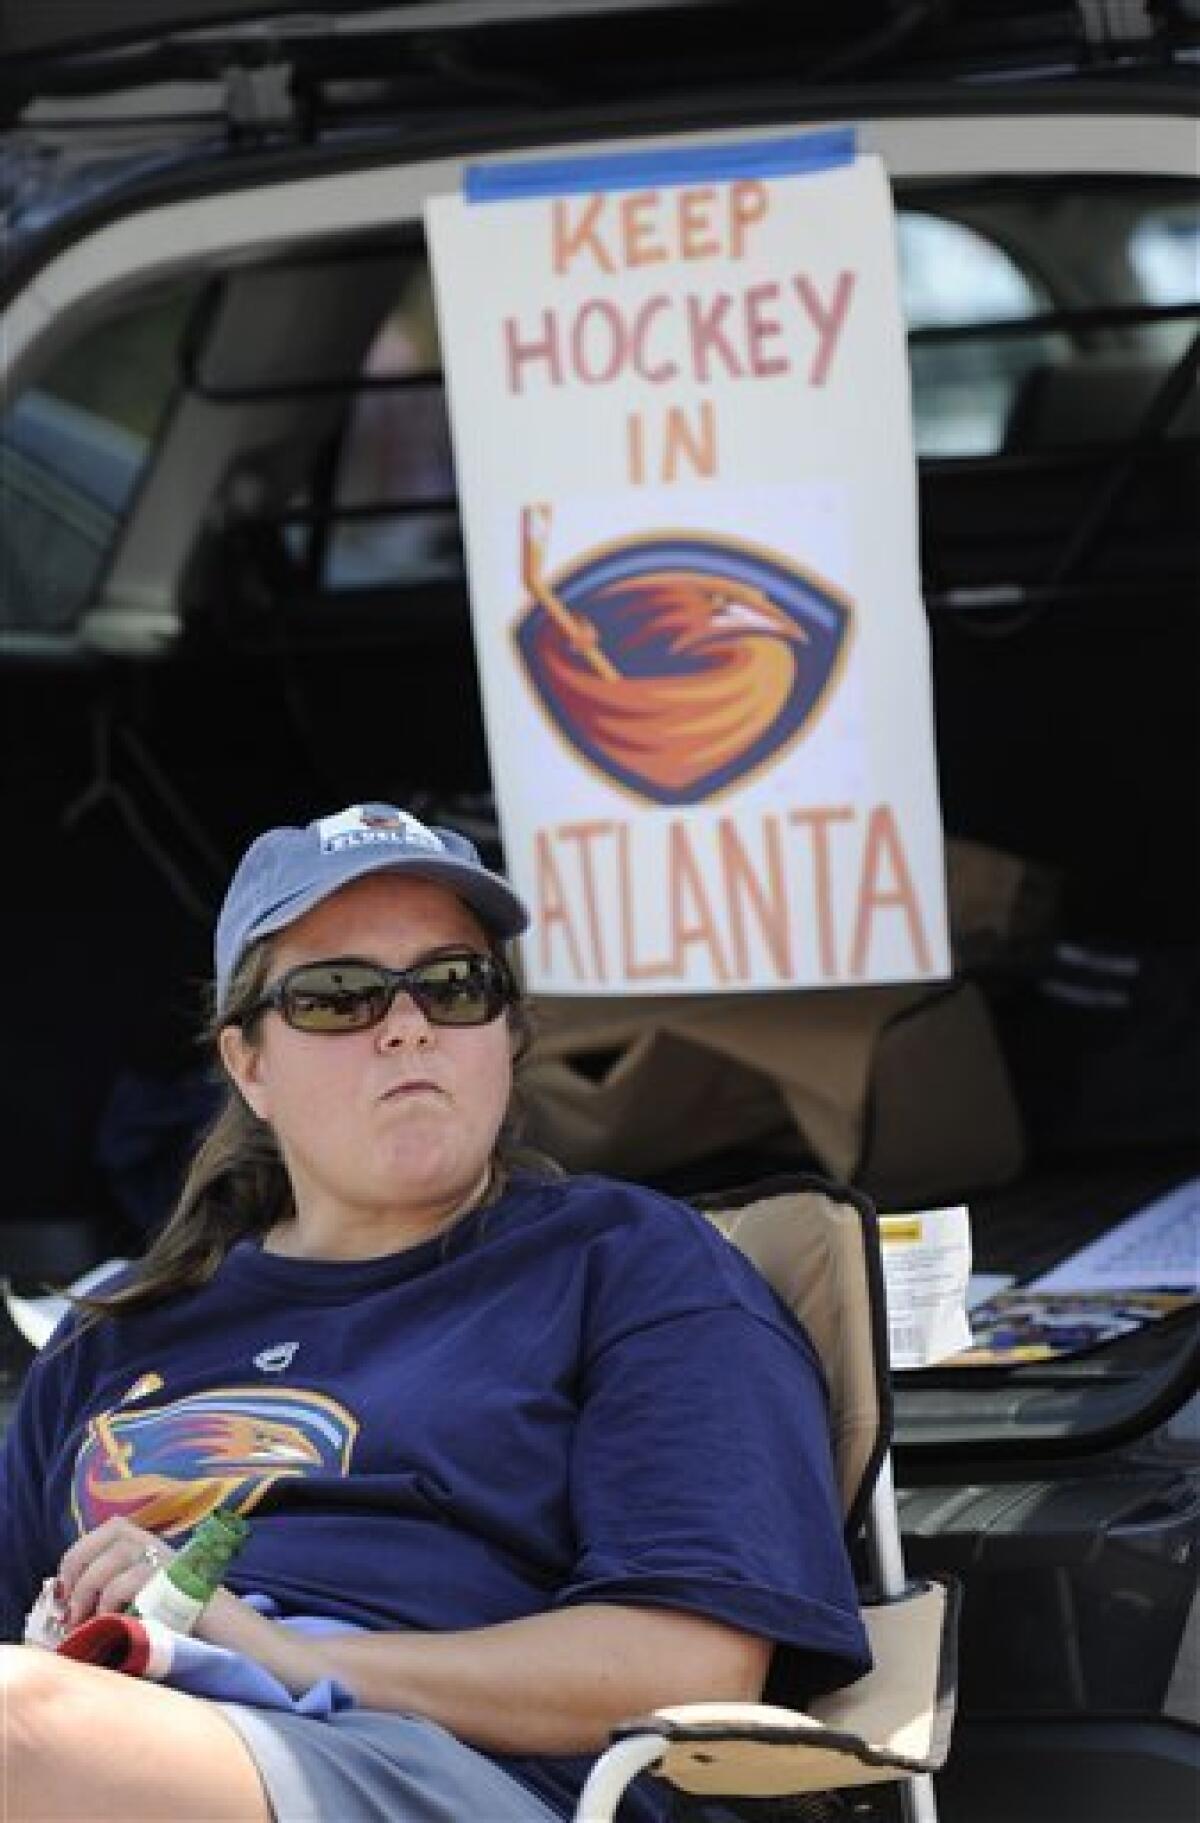 Tampa to Hawks fans: Stay out!